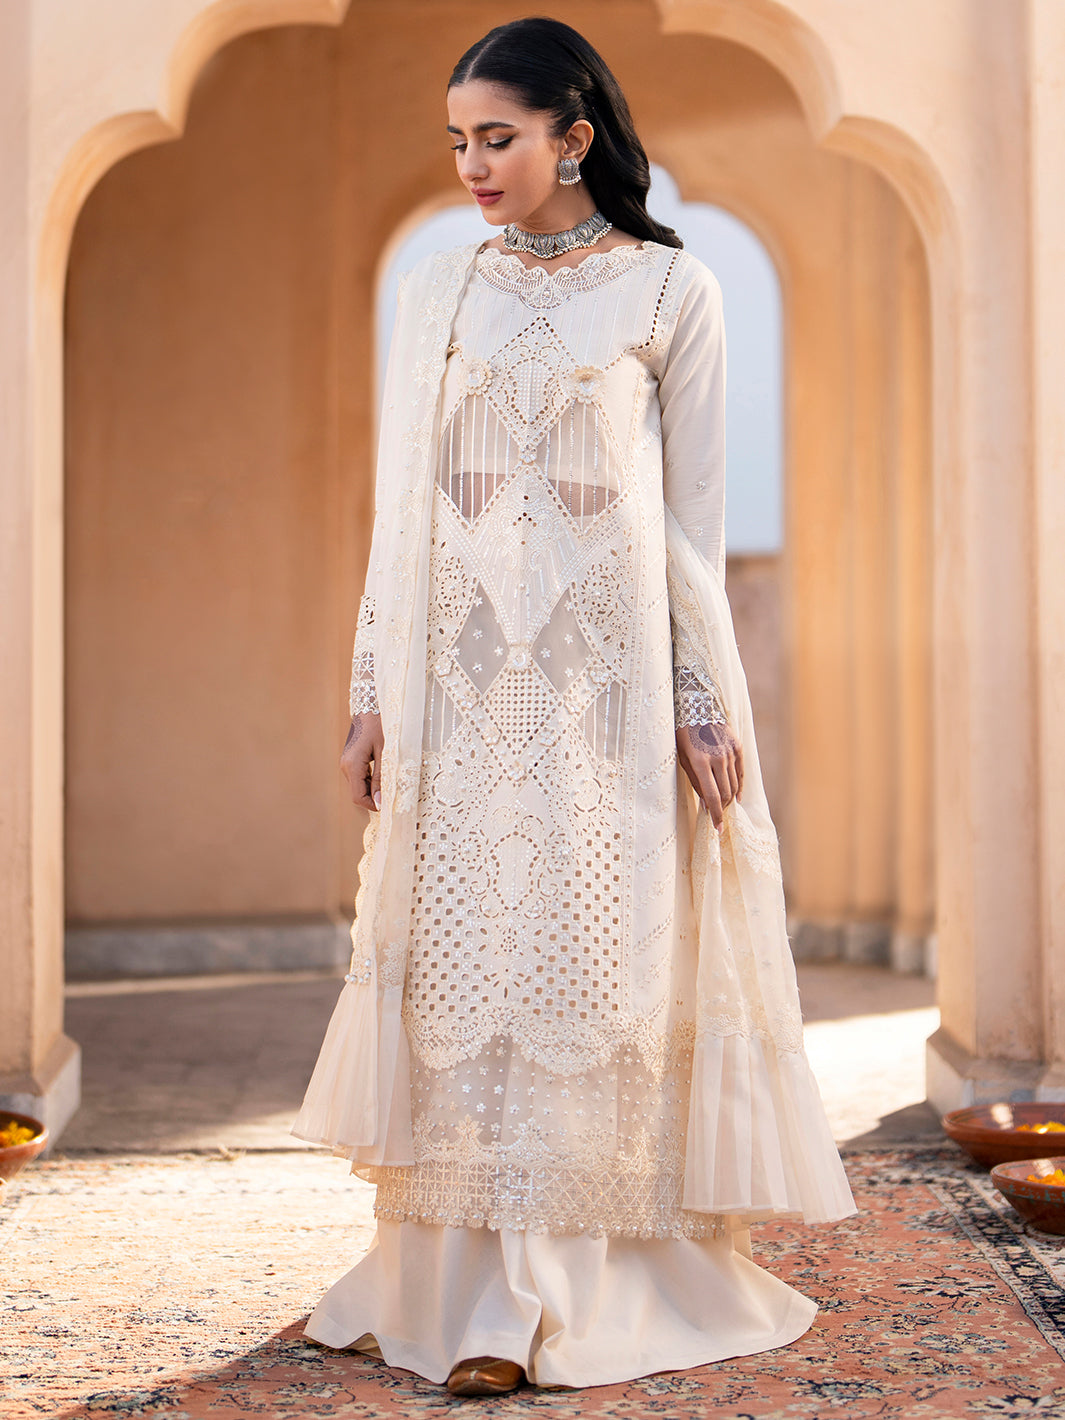 Binilyas's Dilbaro Embroidered Festive Lawn 24